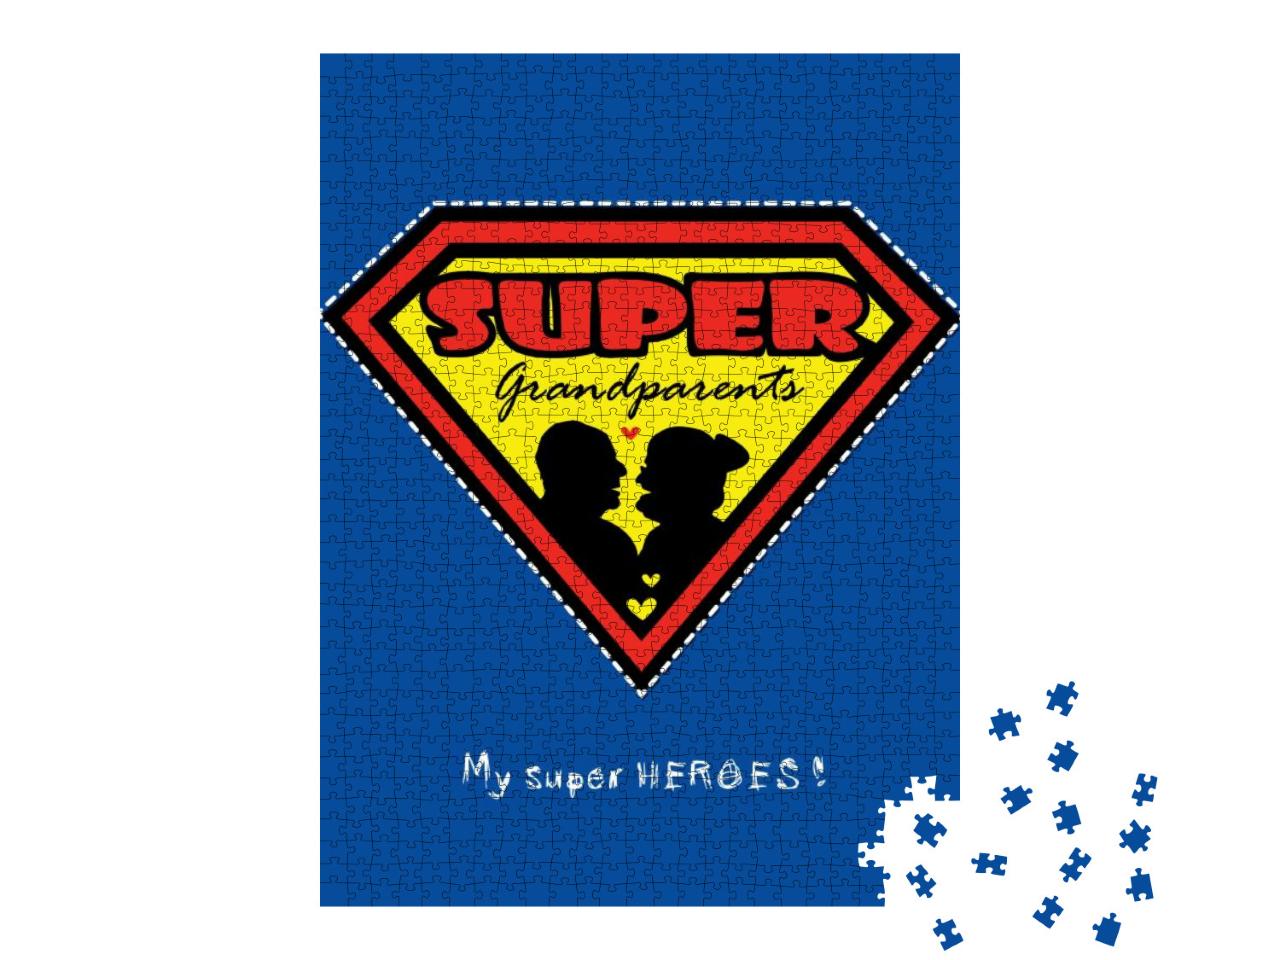 Super Grandparents Vector Design Card... Jigsaw Puzzle with 1000 pieces